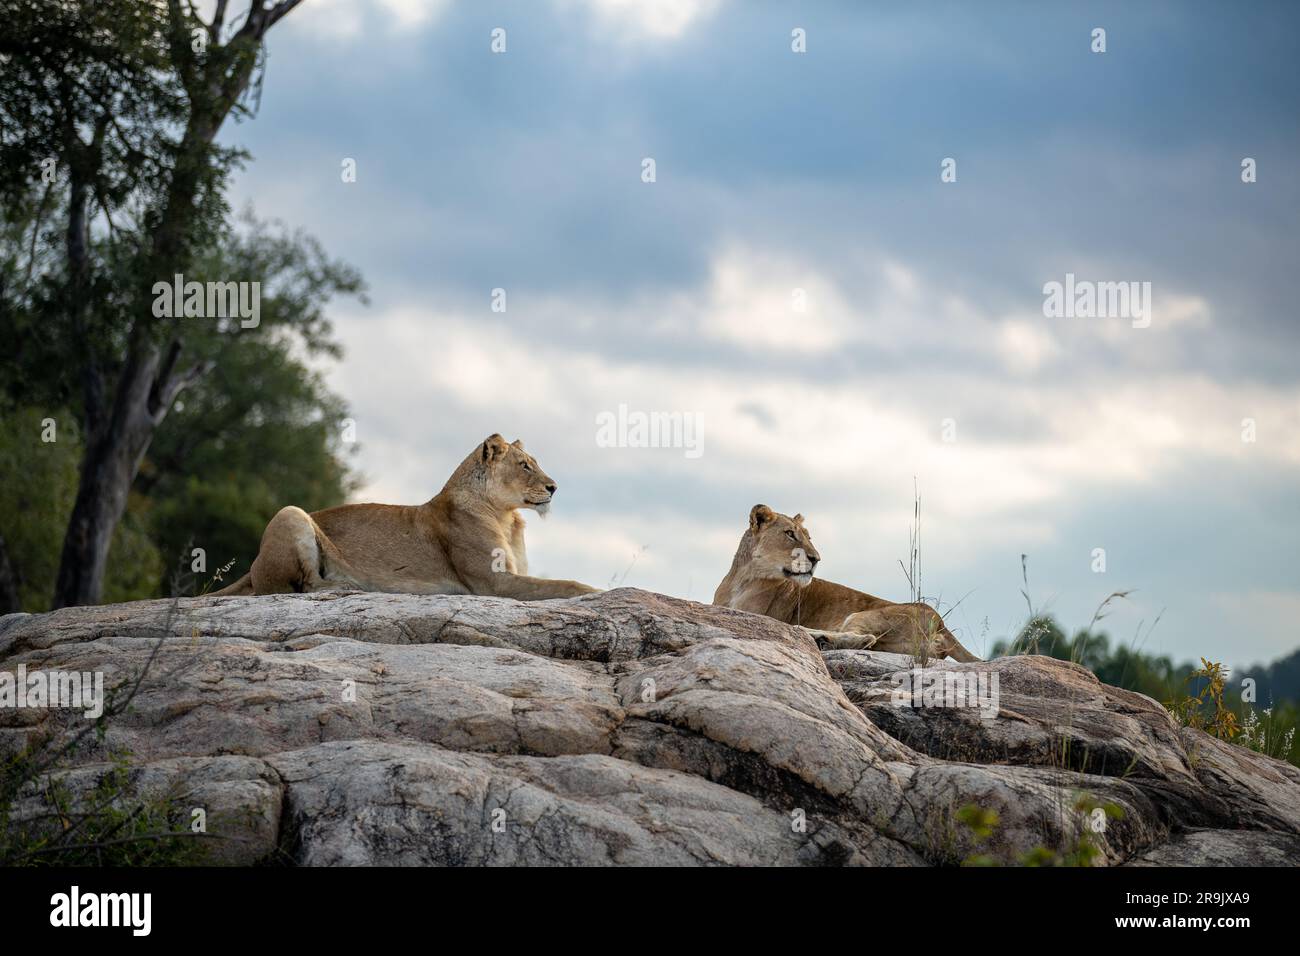 Two lionesses, Panthera leo, lie together on a rock. Stock Photo